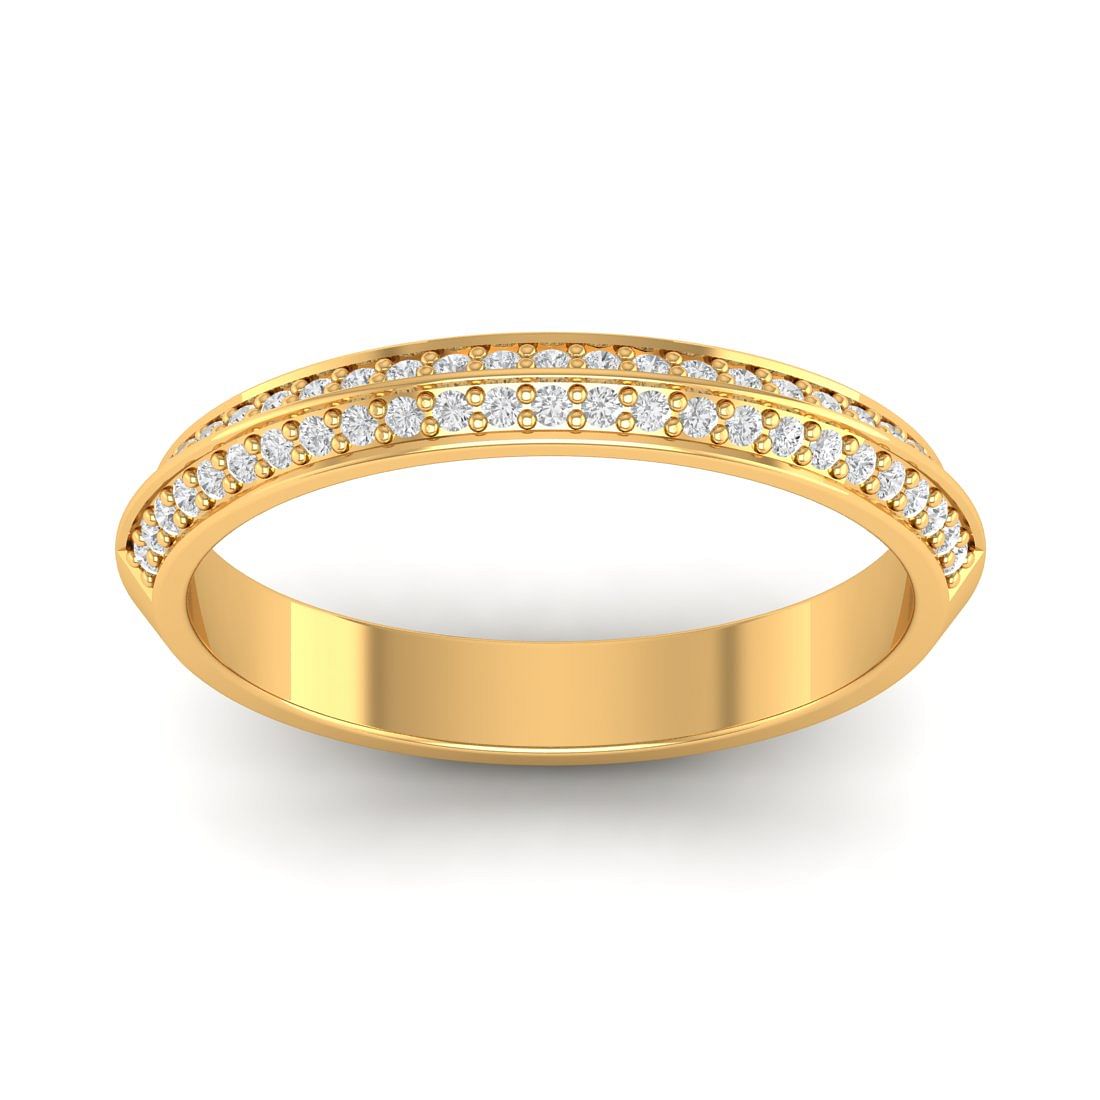 Chanchal band style yellow gold diamond ring for women